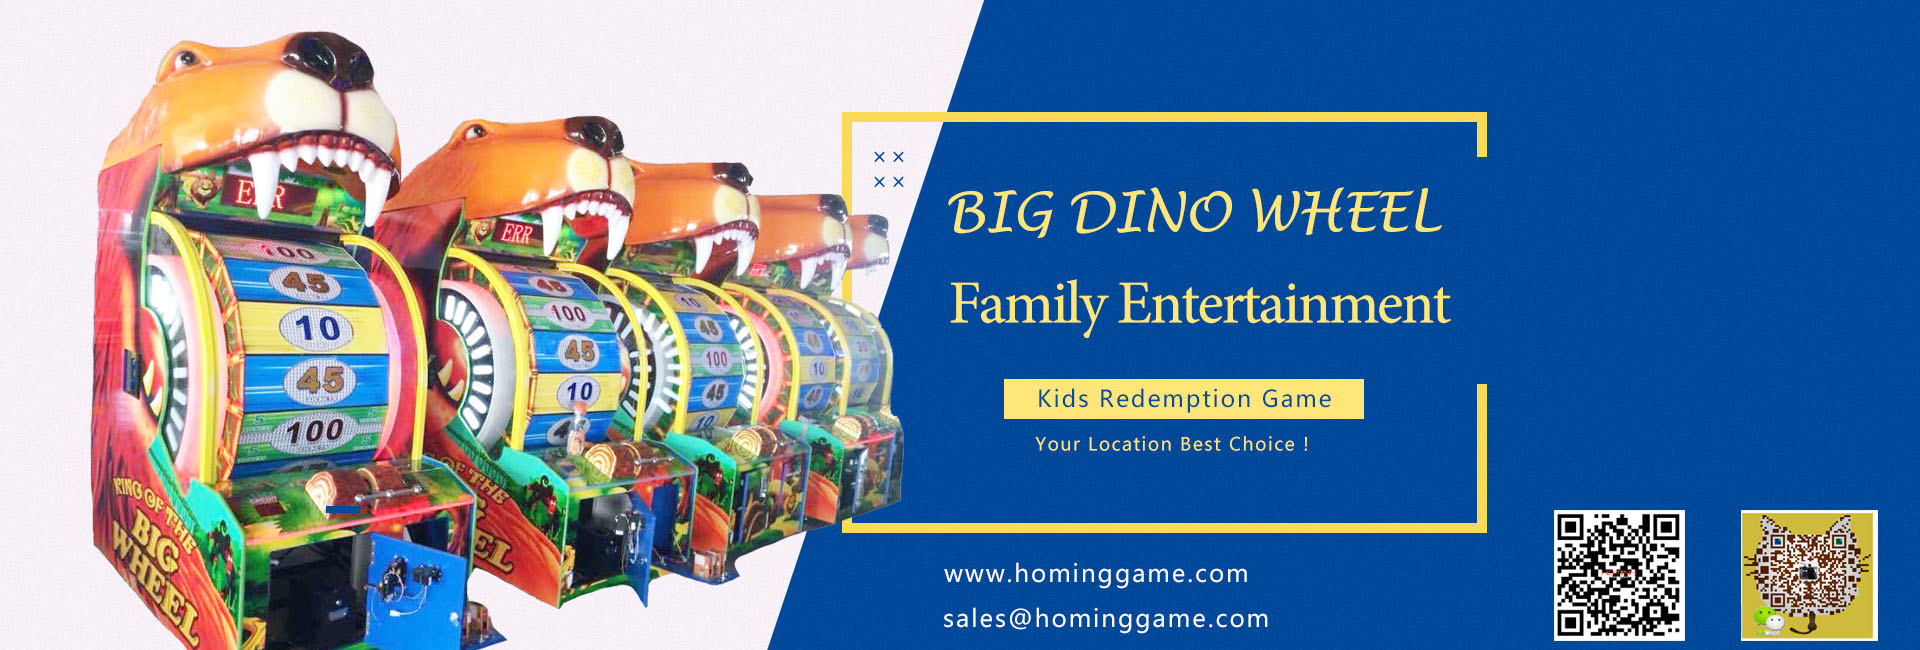 Big Dino Wheel Redemption Game,Family Entertainment Game,Big Wheel Game,Dino Wheel Game,Big Wheel redemption Game Machine,Bass Wheel Redemption Game,Bass Wheel,Game Machine,Arcade Game Machine,Coin Operated Game Machine,Kids Game Equipment,Entertainment Game,Slot Game Machine,indoor game machine,Electrical Game Machine